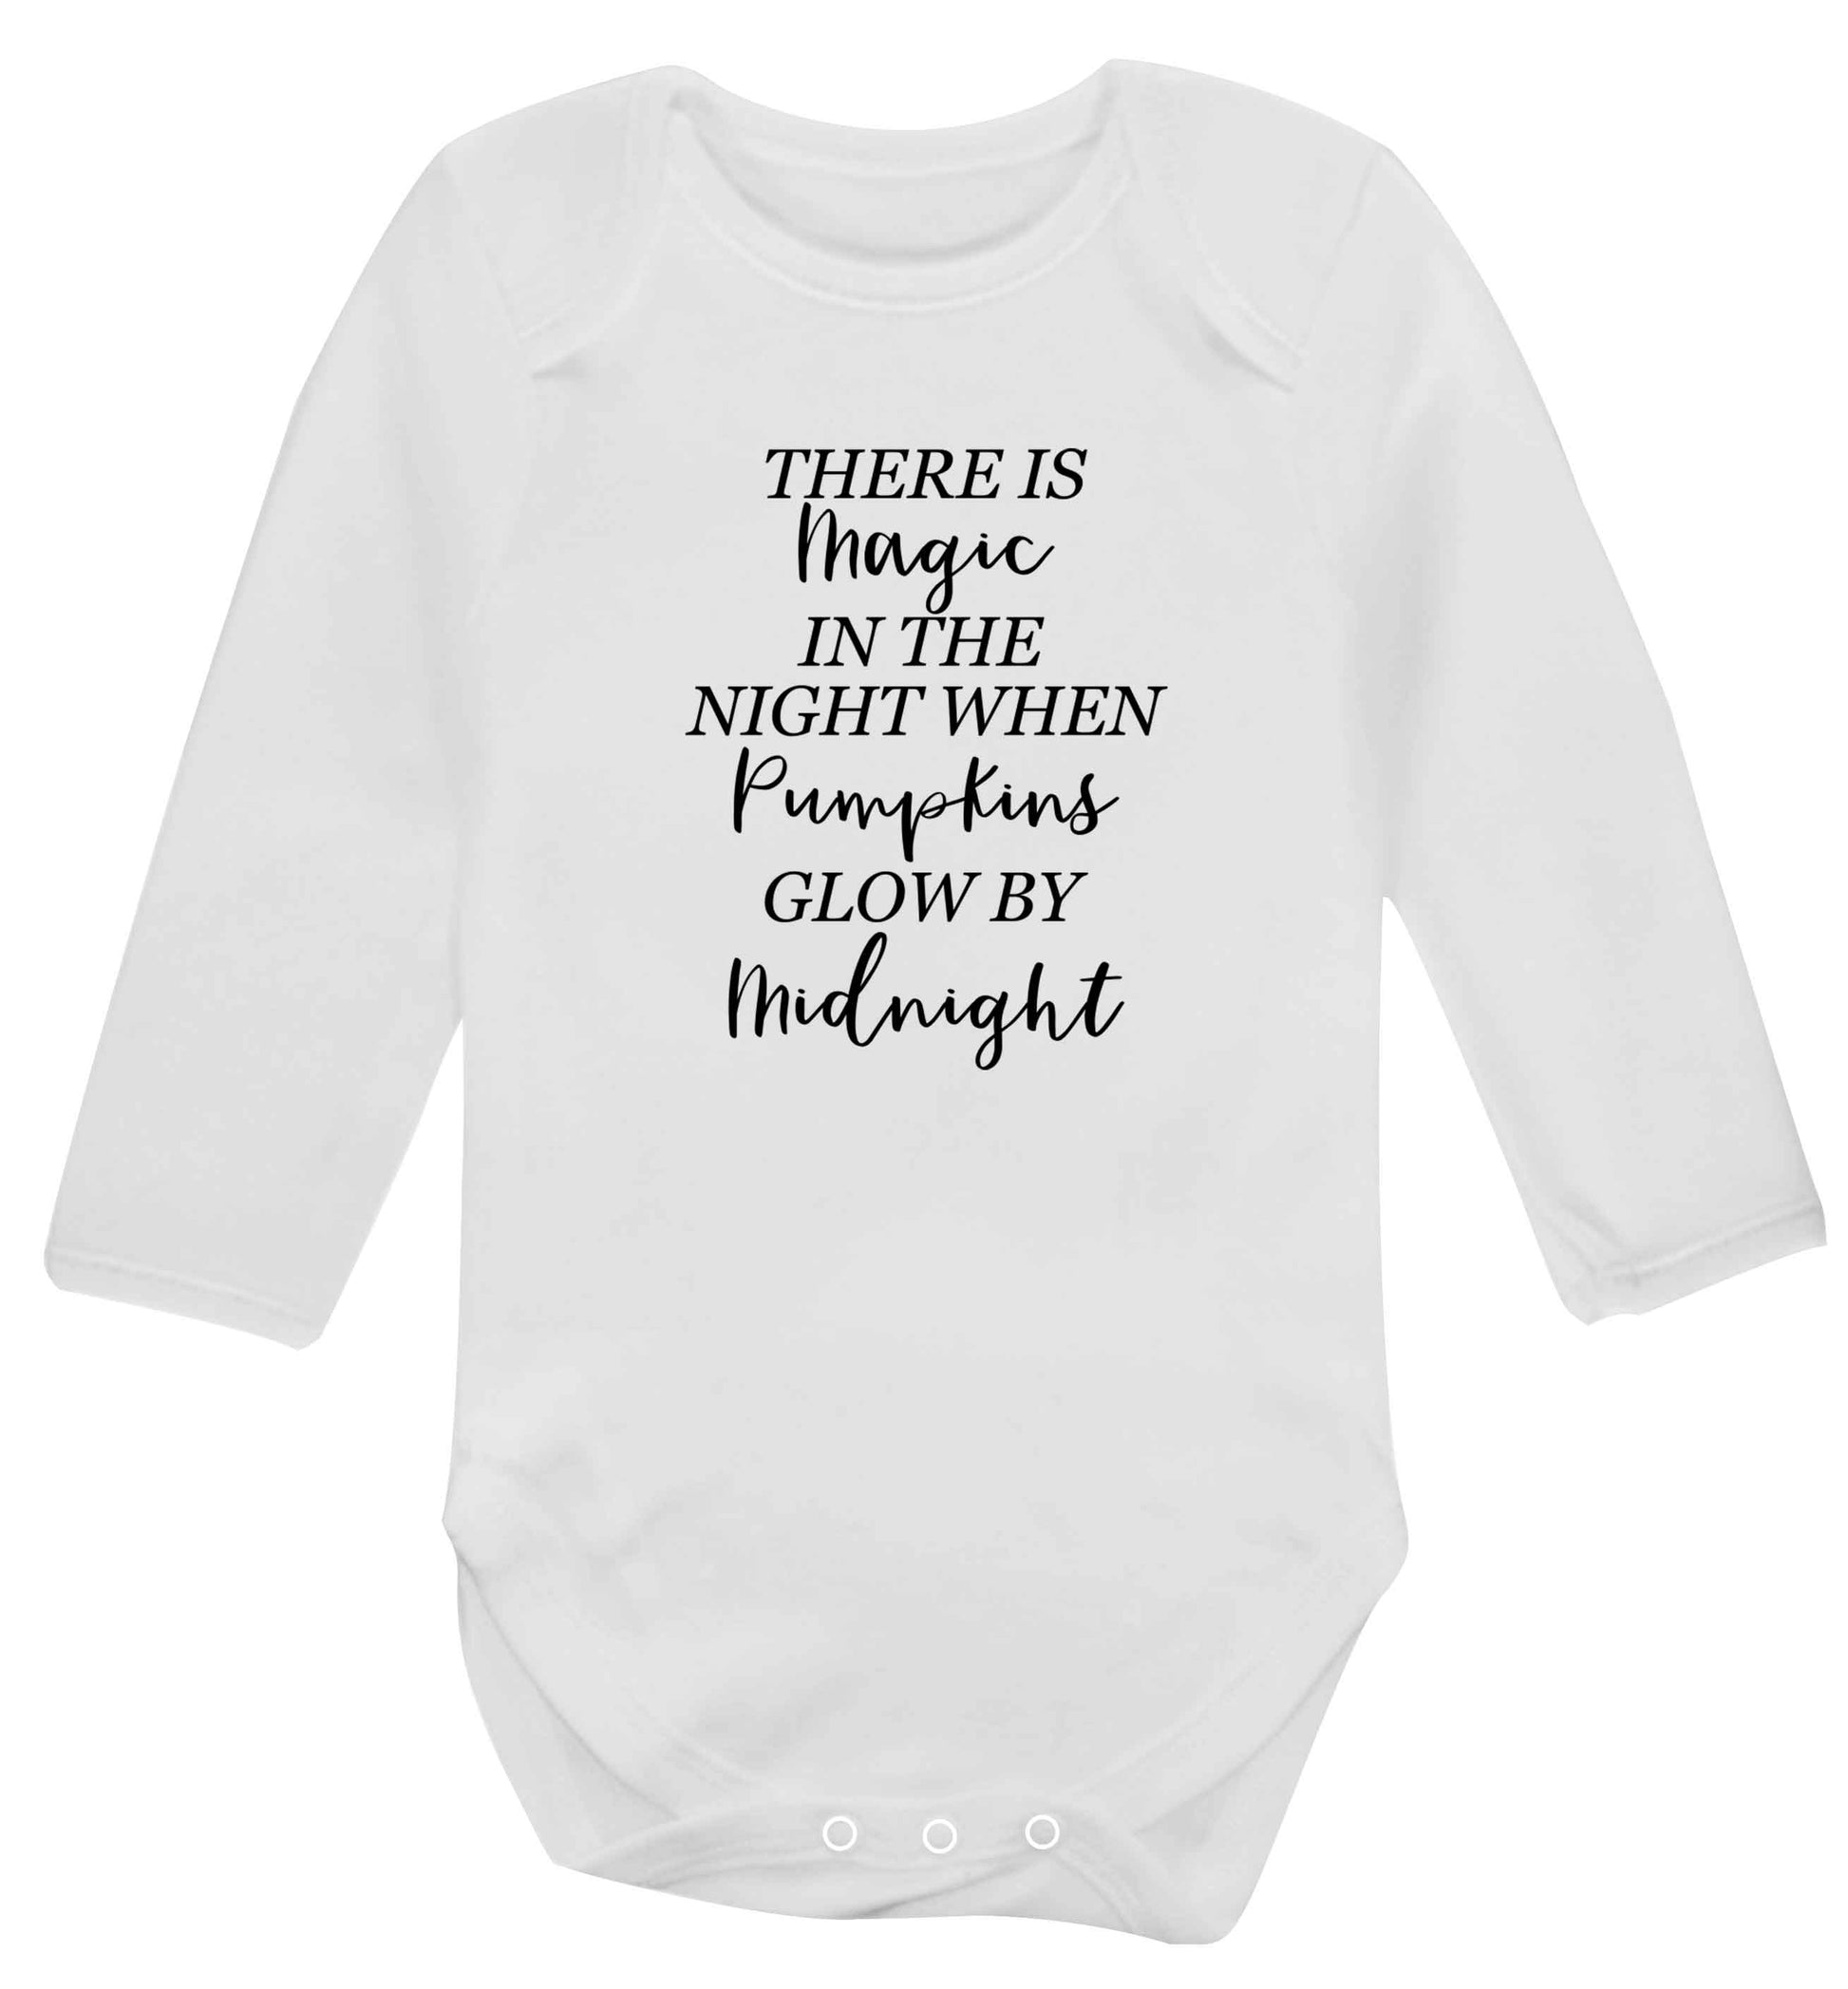 Magic in Night baby vest long sleeved white 6-12 months